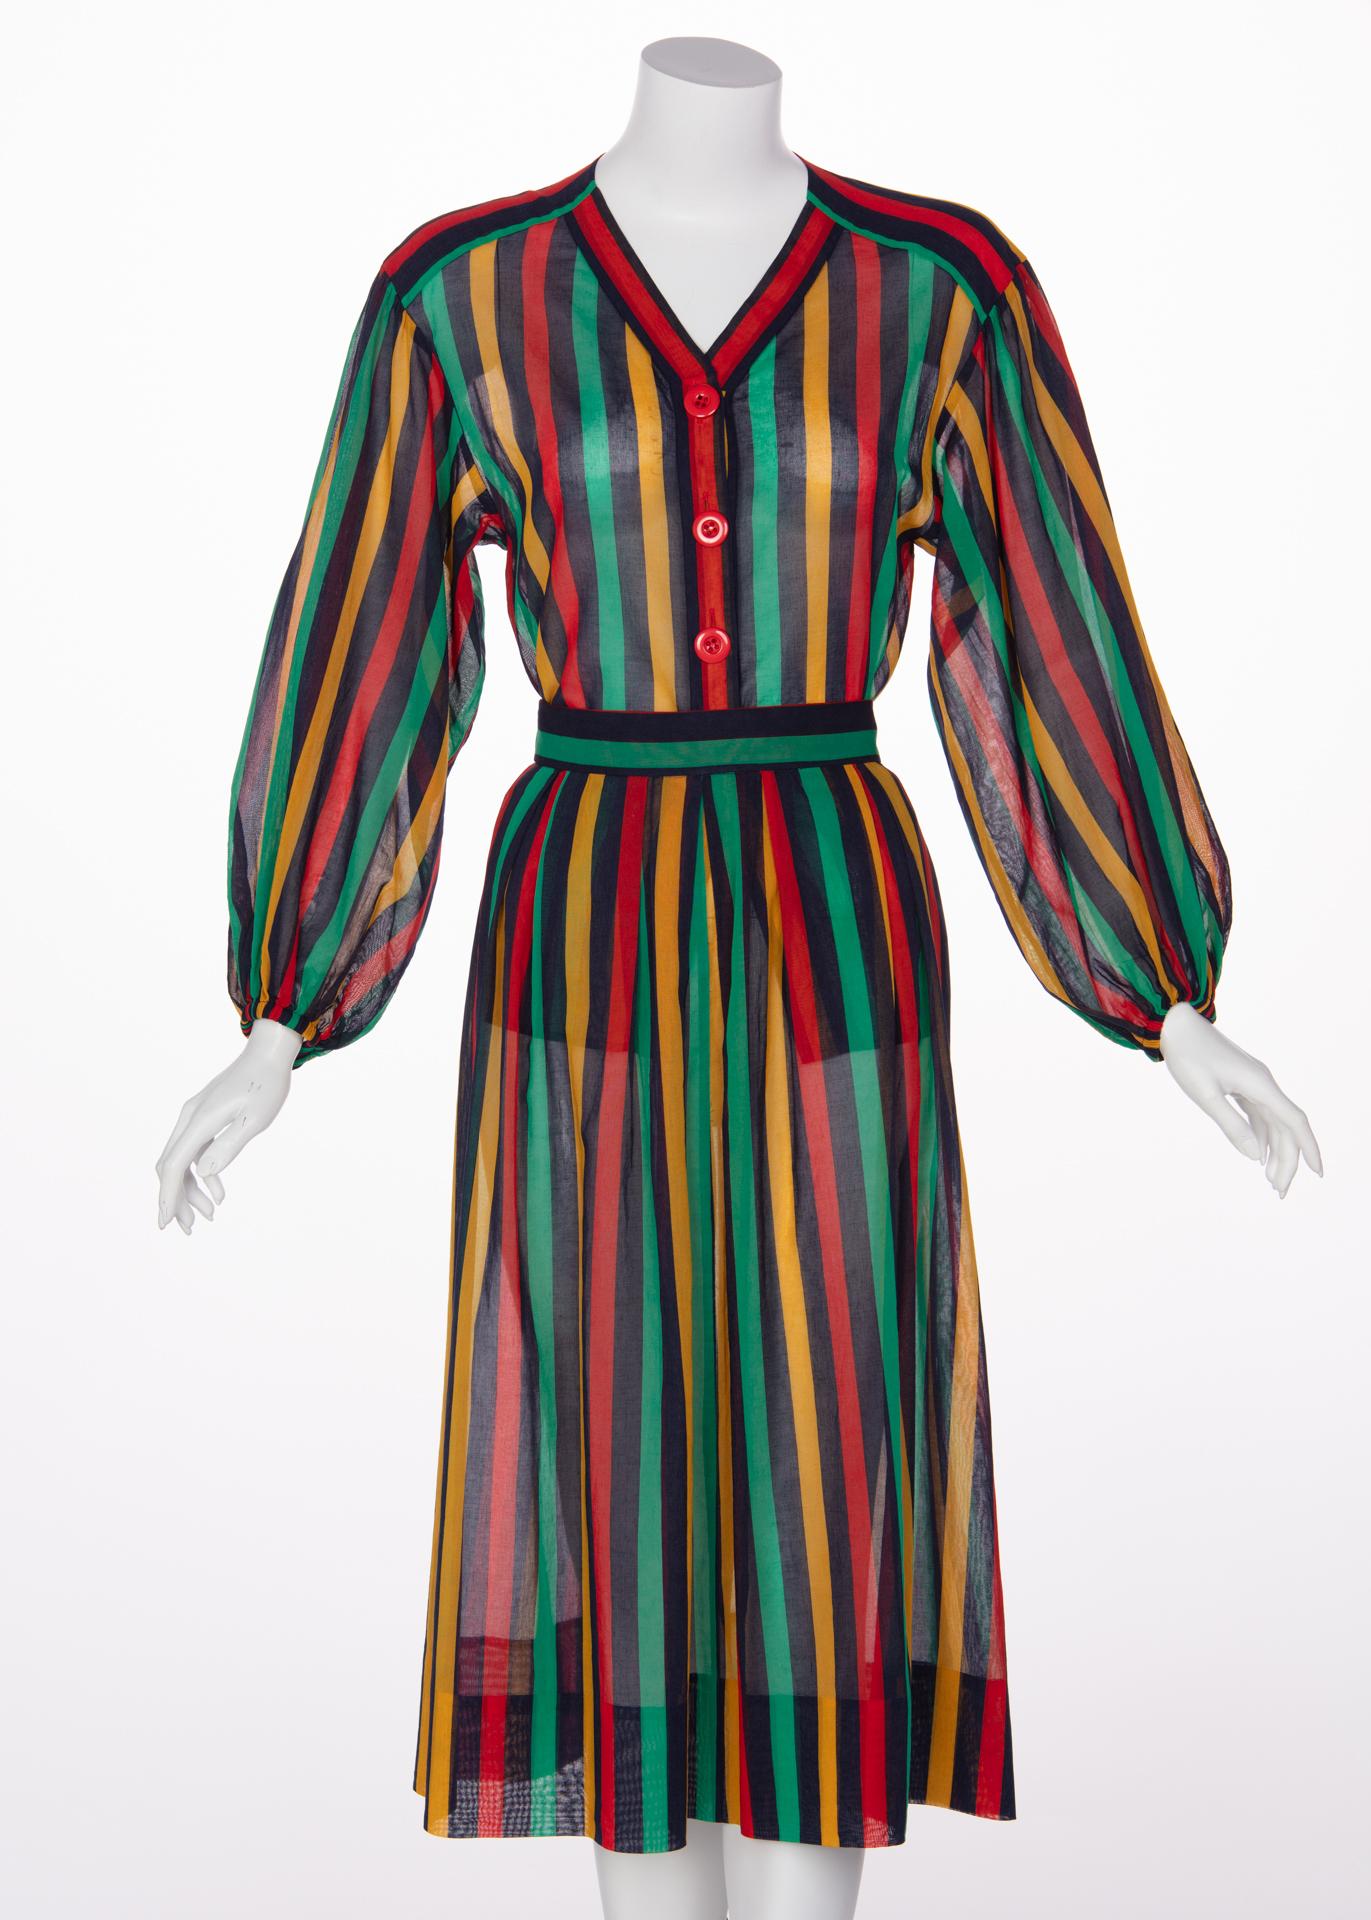 Stripes were all the rage in YSL’s Rive Gauche collections in the 80s and 90s. The simplicity in the patterning speaks to the YSL label, however the often mixture of bold or dizzying color combinations made these designs anything but boring. Being